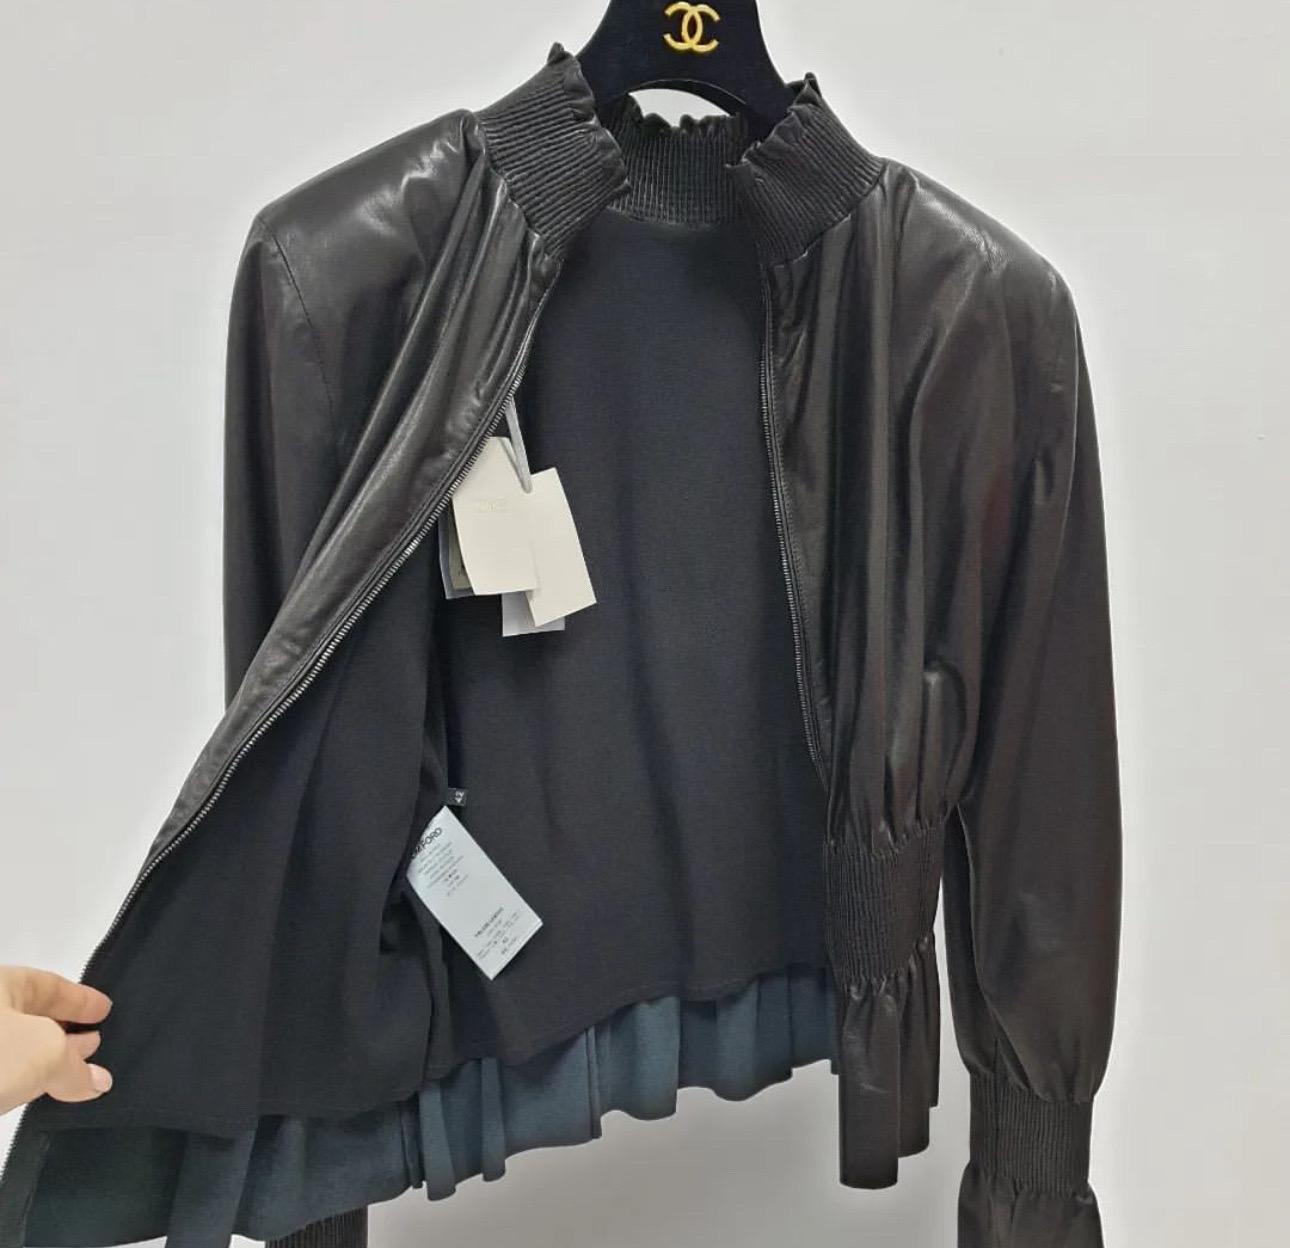 Tom Ford Black Leather Jacket Skirt Suit In Good Condition For Sale In Krakow, PL